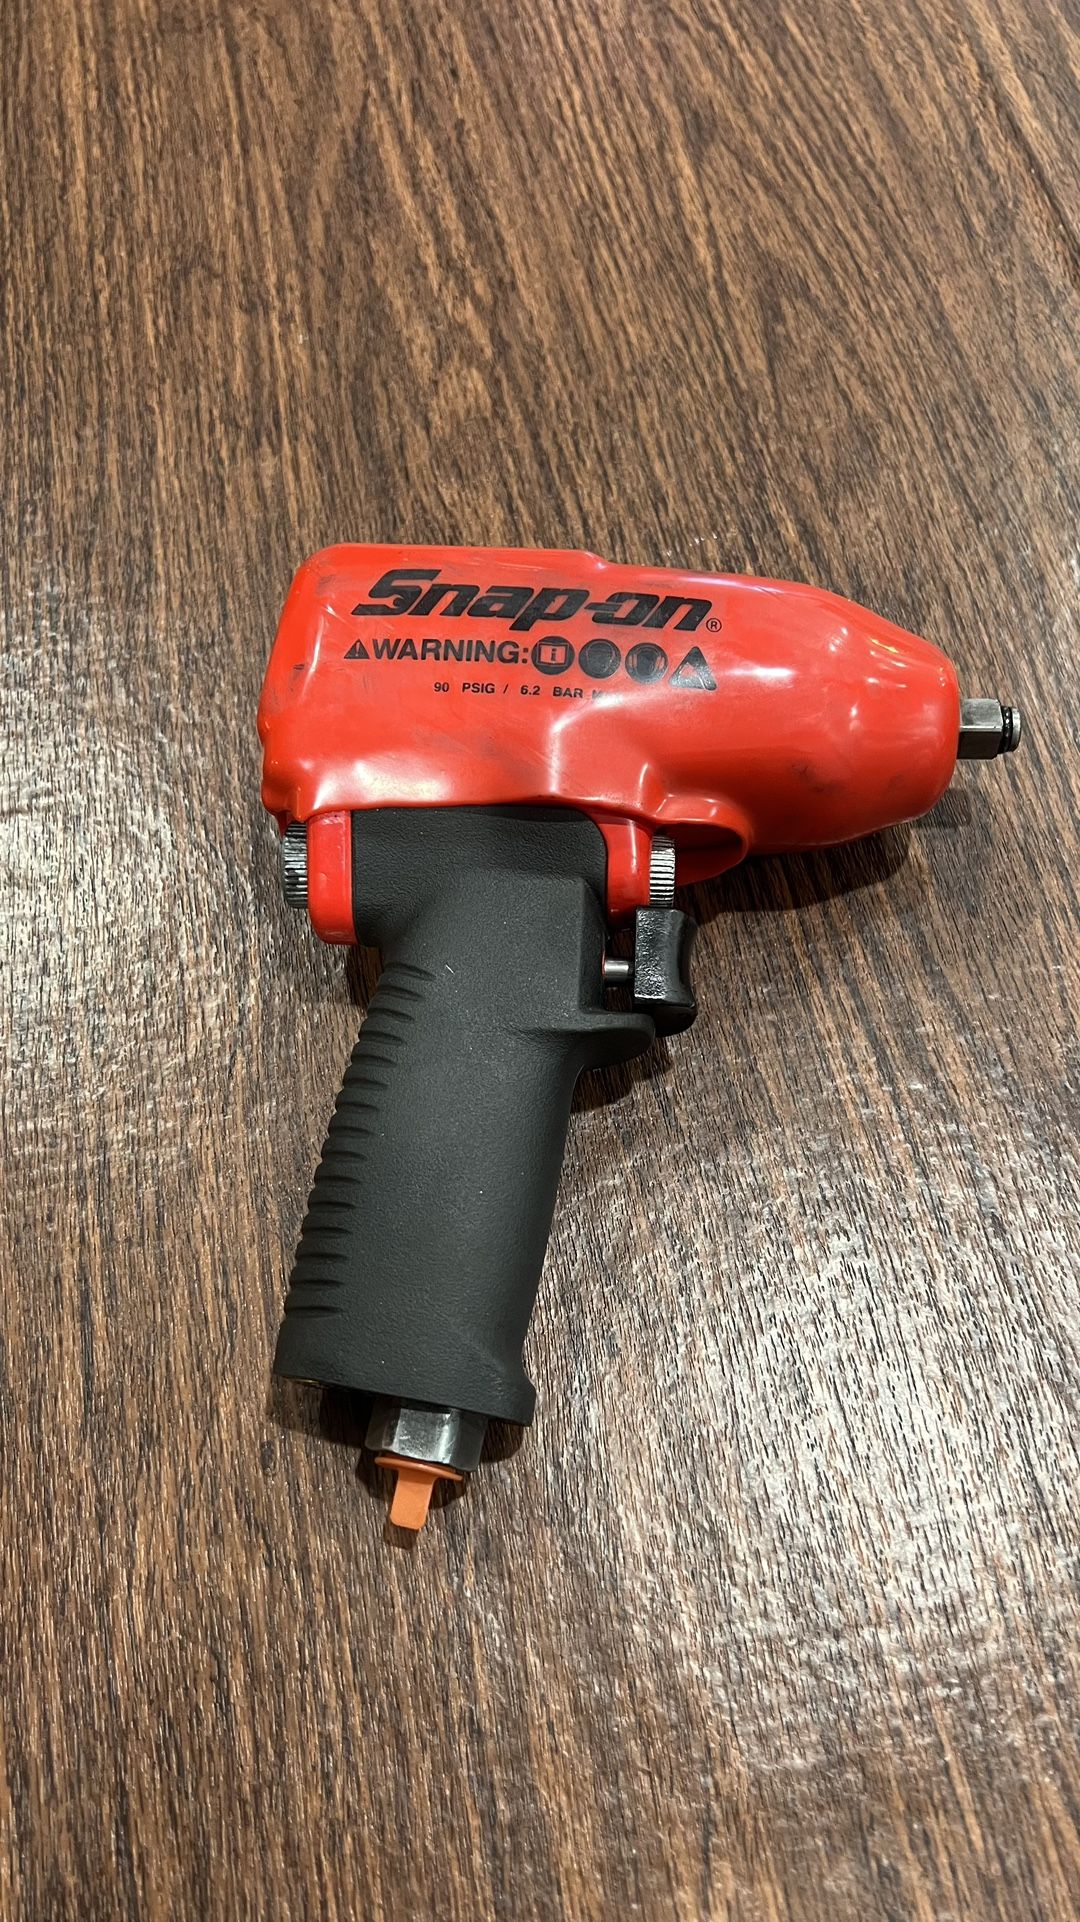 MG325 Snap On 3/8 Impact Wrench 